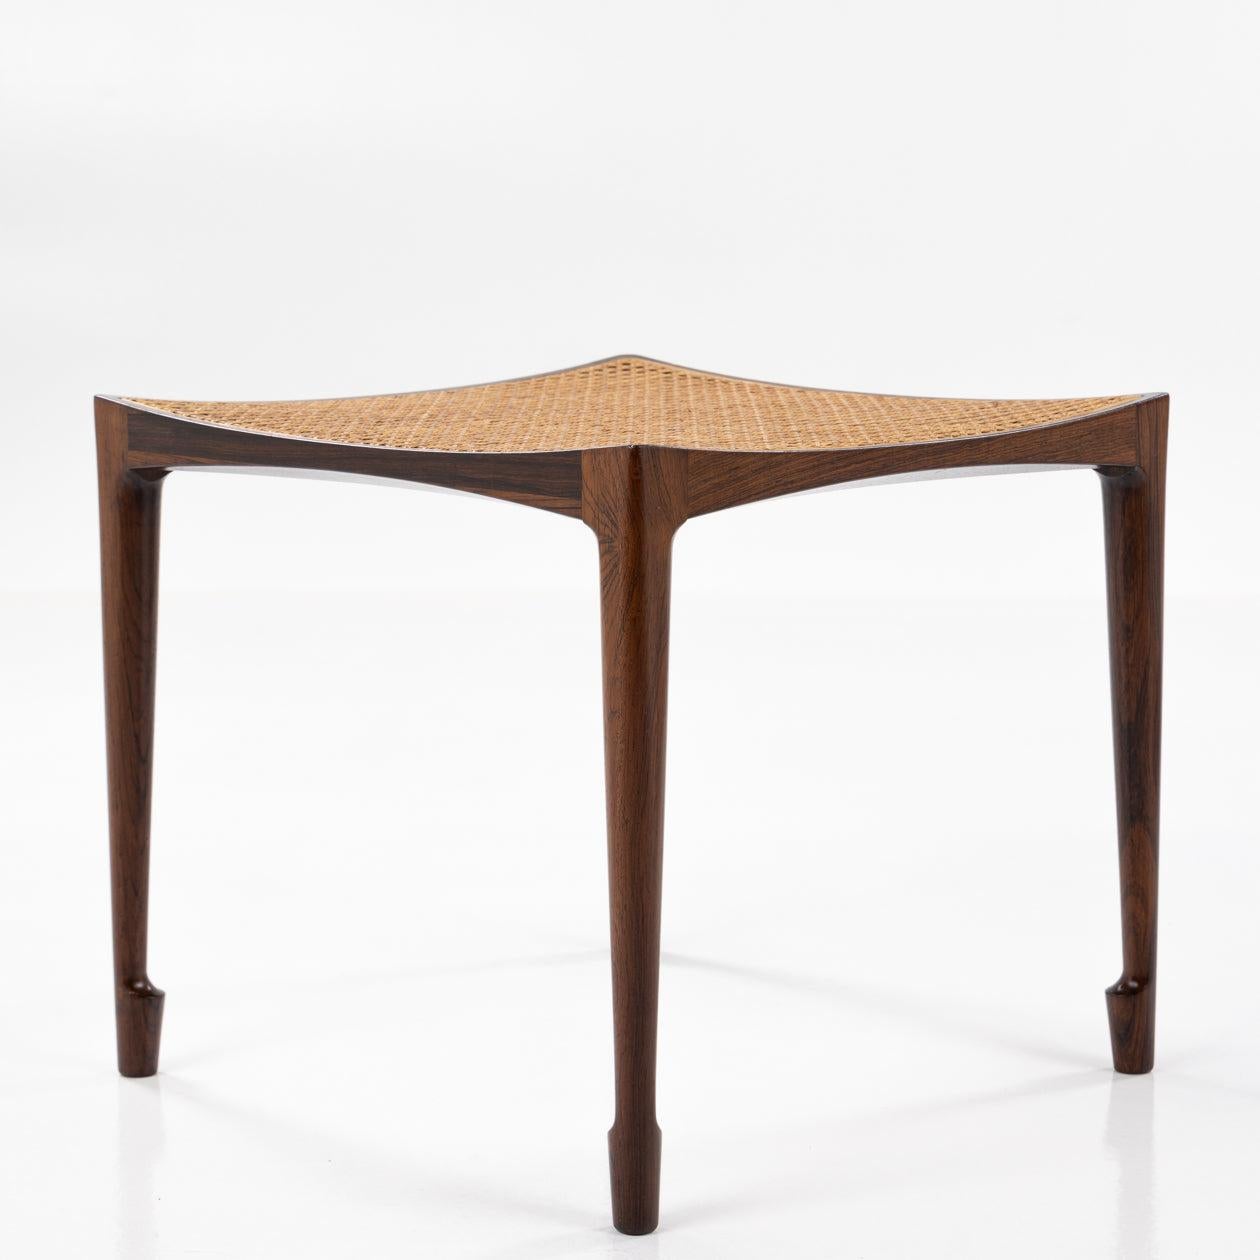 Stool with Rio rosewood frame, slightly curved seat with French wicker and tapered legs. Designed in 1958.
Manufactered by Wørts Møbelsnedkeri.